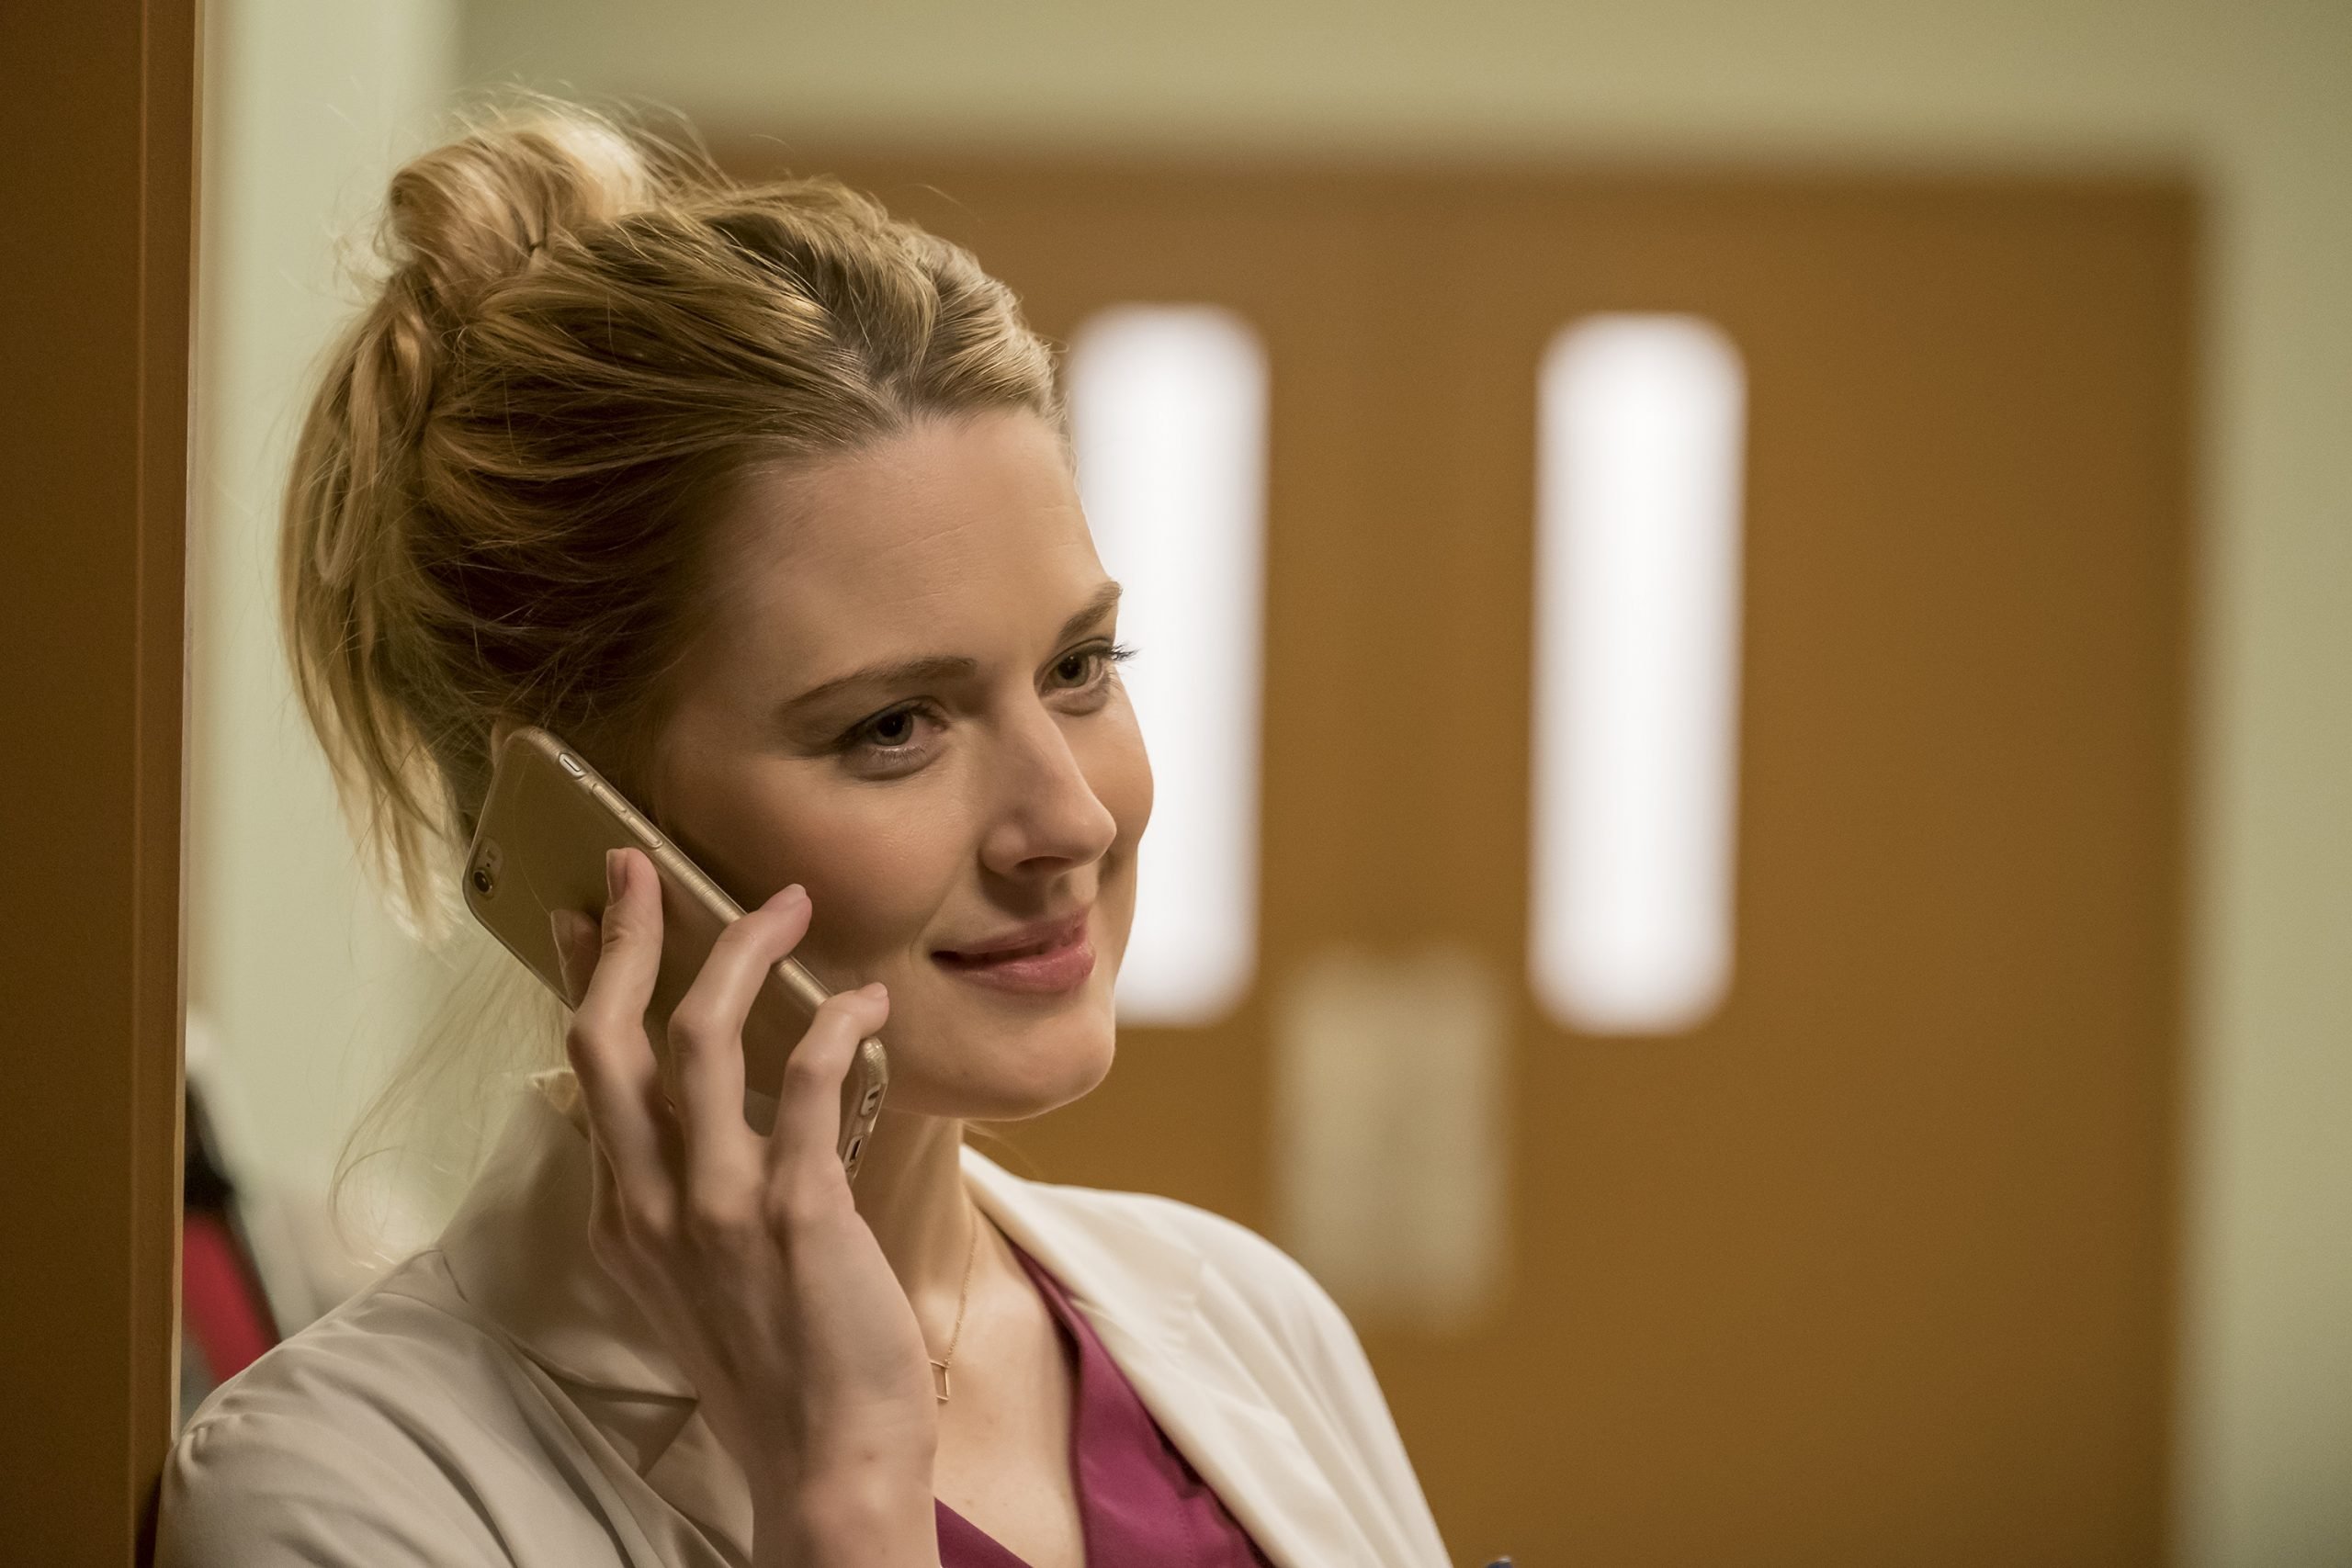 Alexandra Breckenridge, in character as Sophie in 'This Is Us' Season 1, wears a white doctor's coat over dark red scrubs and holds her cell phone to her ear.